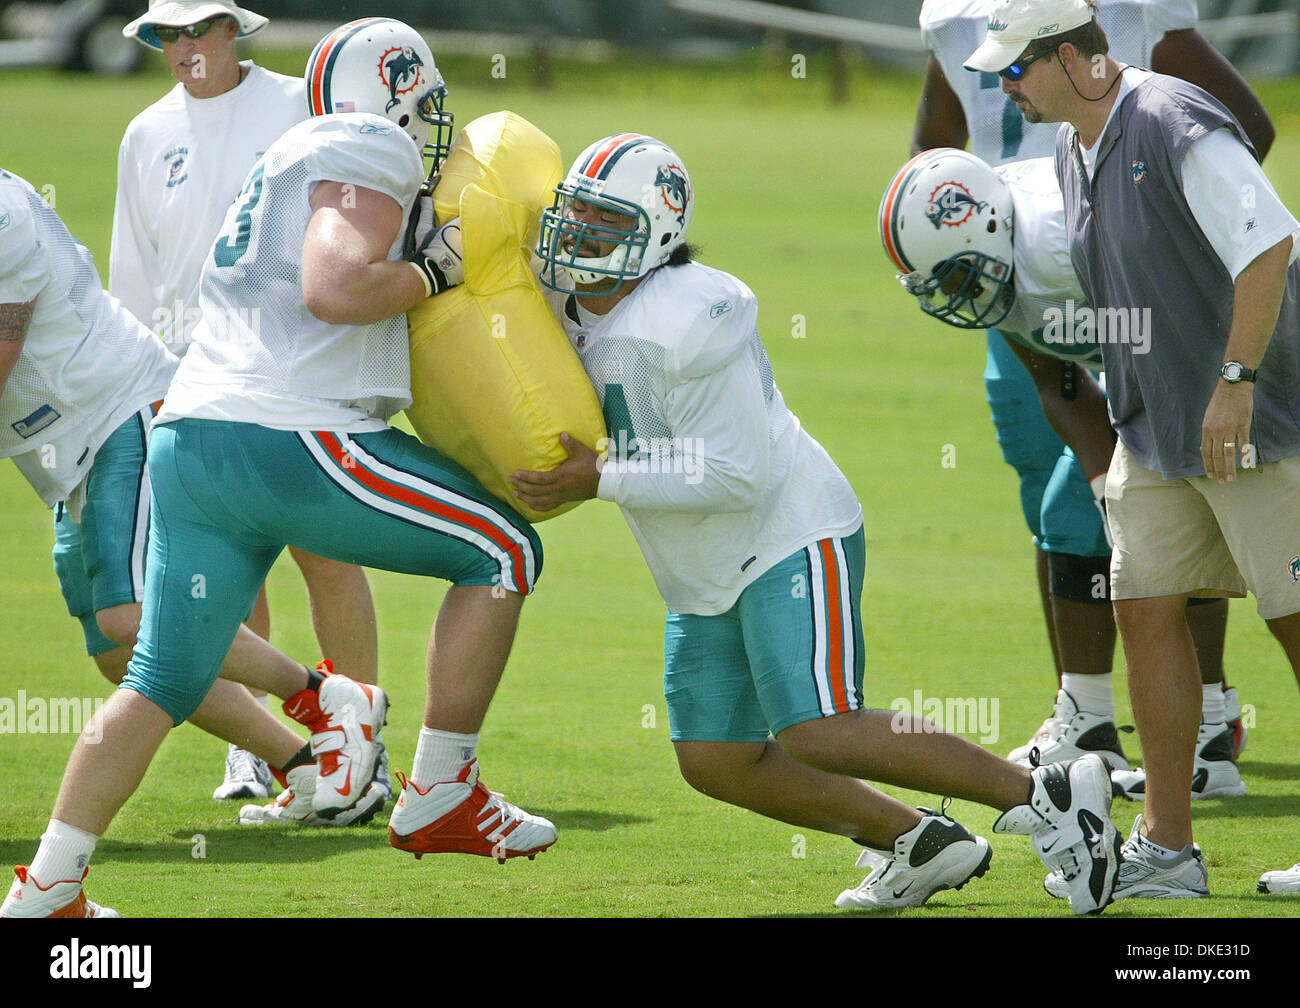 Jul 25, 2007 - Davie, FL, USA - Miami Dolphins rookie lineman SAMSON SATELE, right, clashes with teammate STEPHEN PARKER, during a drill at Dolphins rookie camp Wednesday in Davie.  (Credit Image: © Bill Ingram/Palm Beach Post/ZUMA Press) RESTRICTIONS: USA Tabloid RIGHTS OUT! Stock Photo